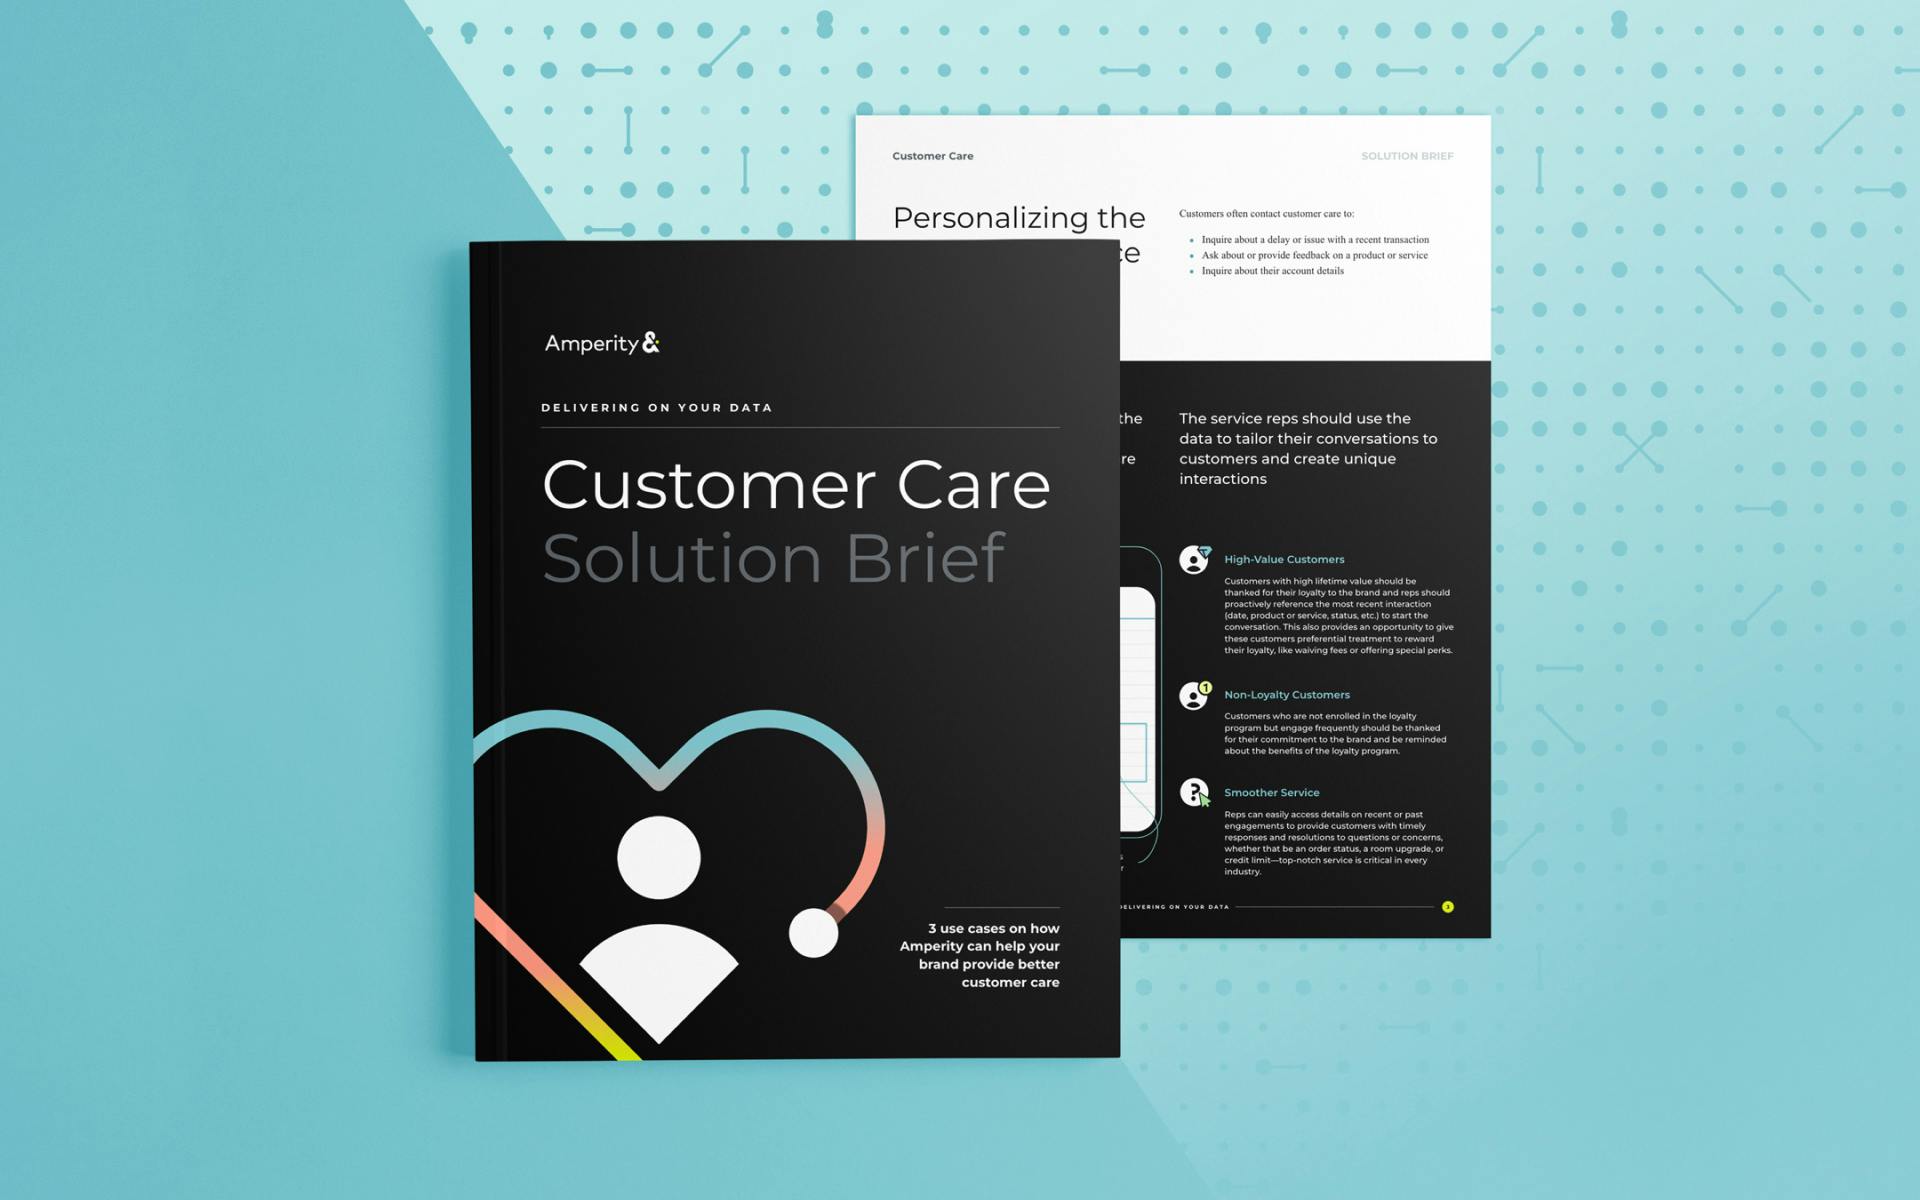 Preview image of the customer care solution brief